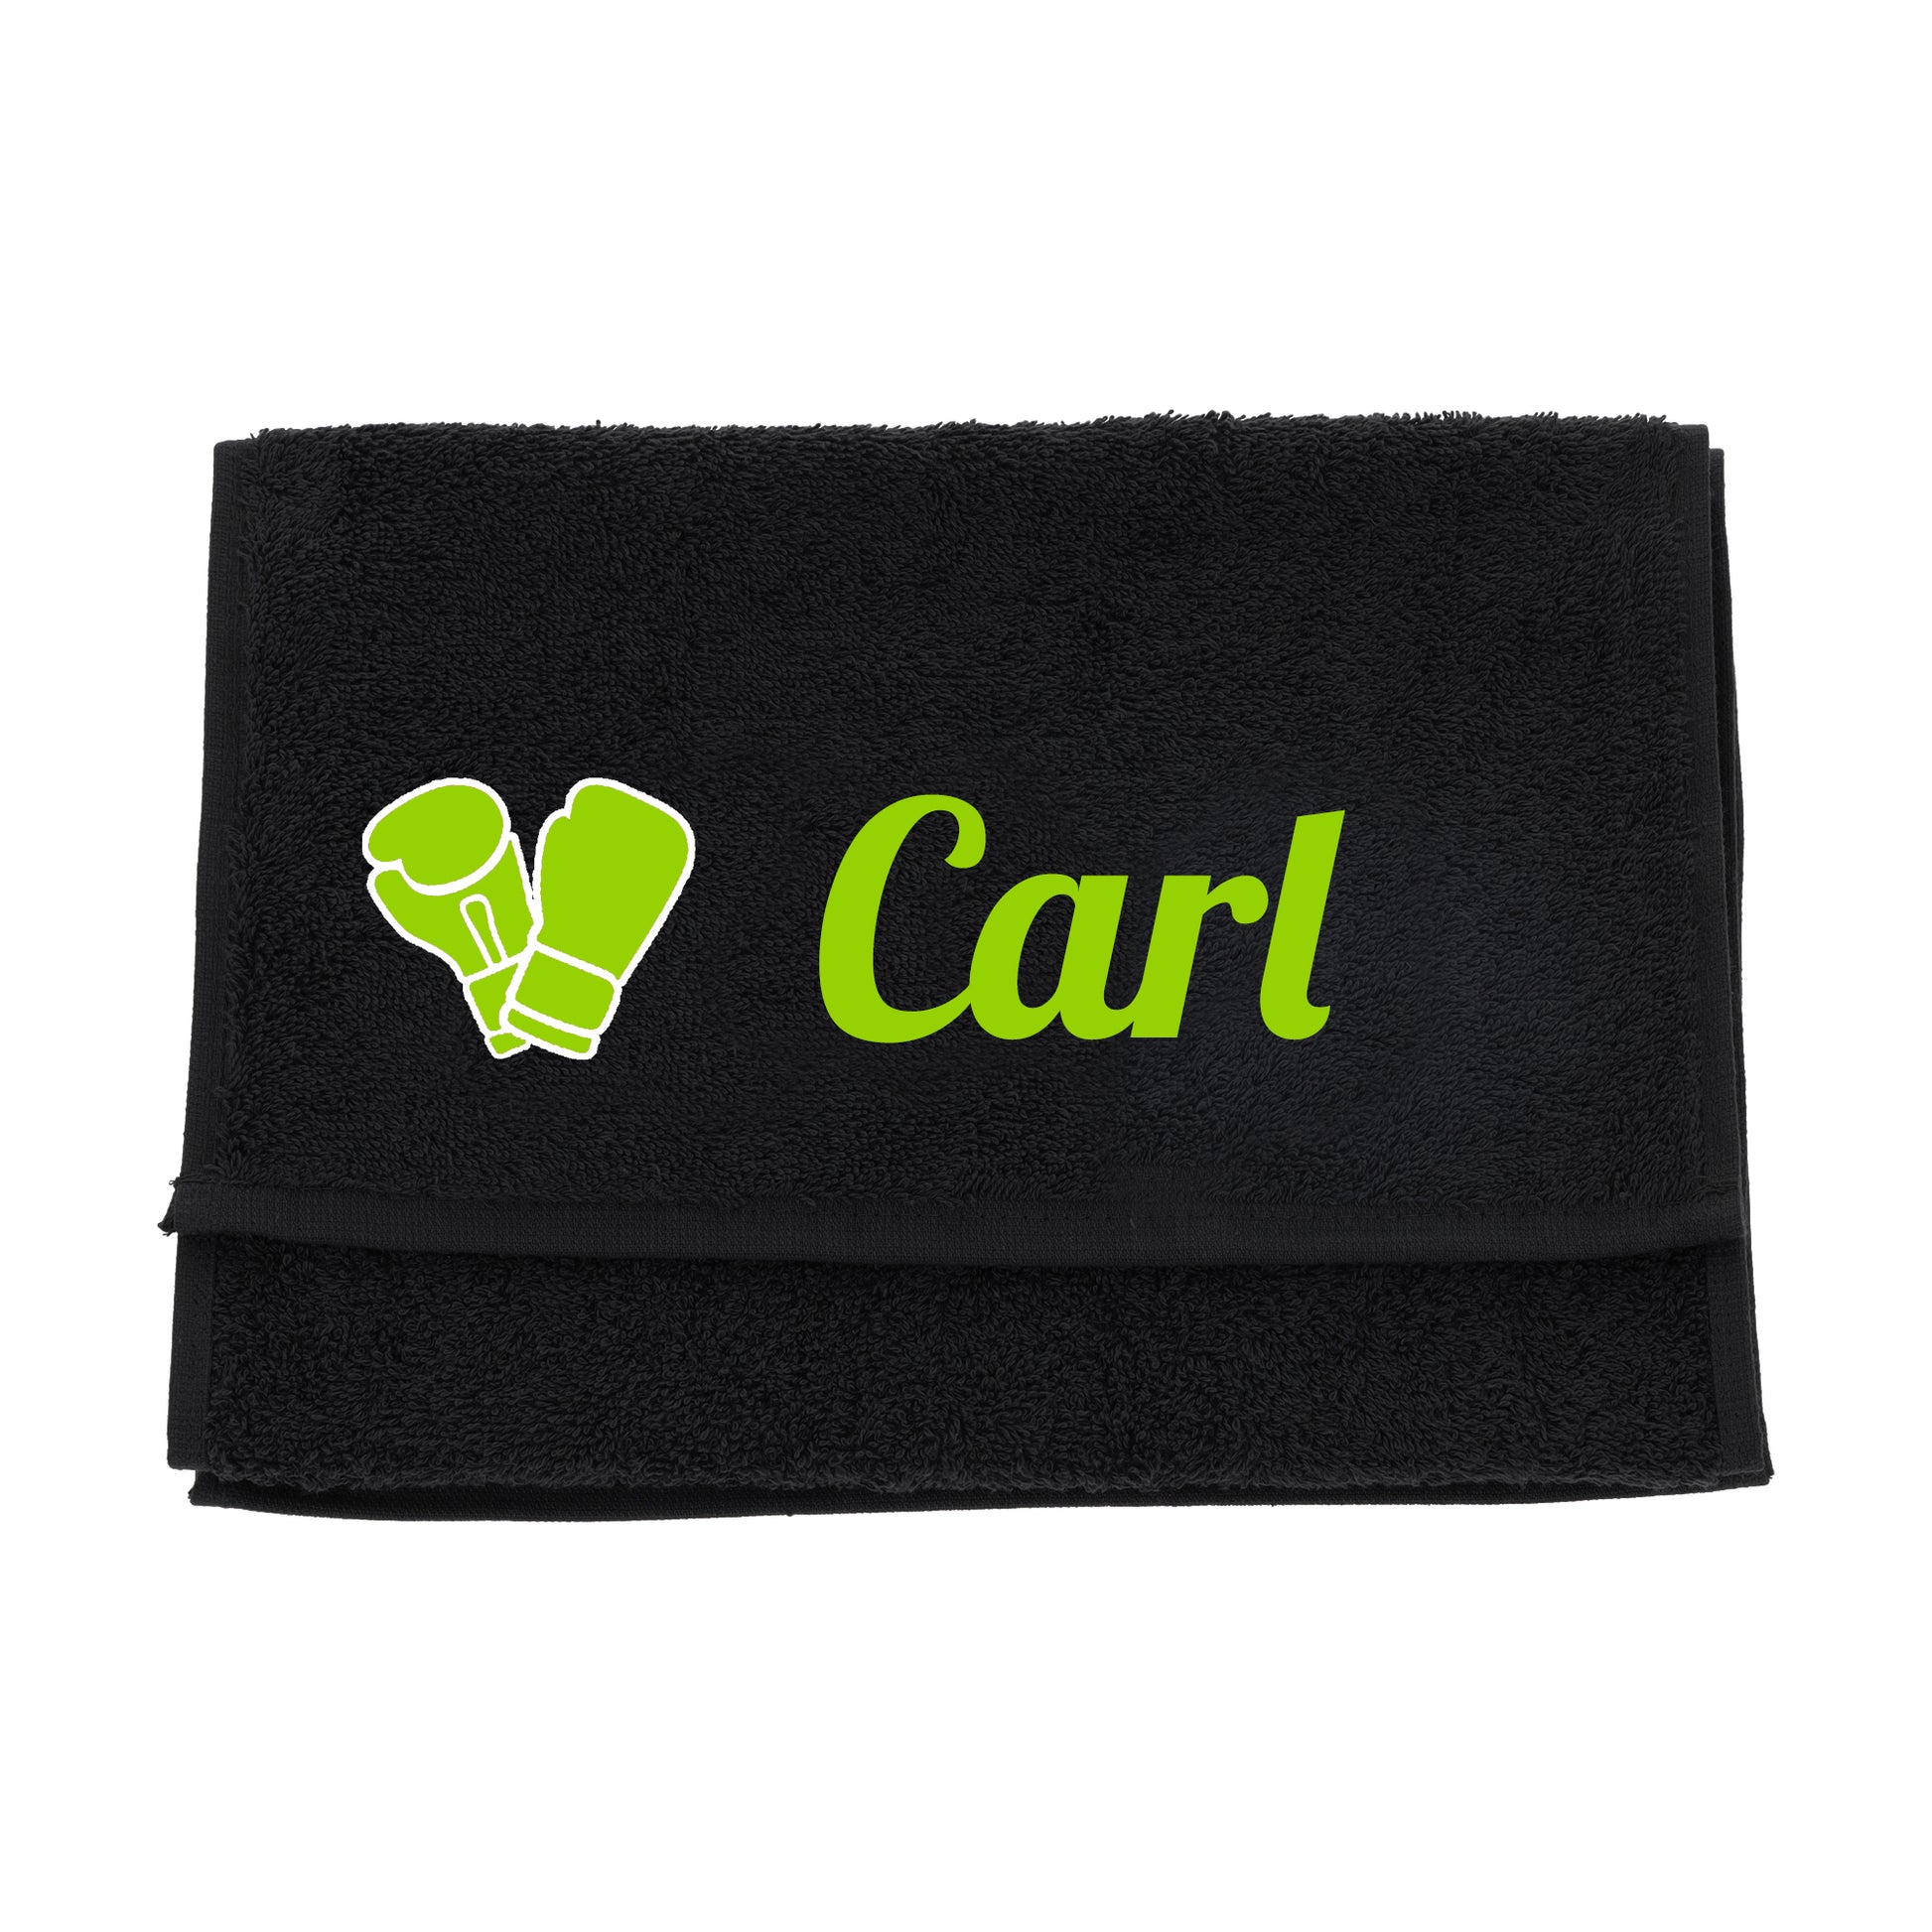 Personalised Embroidered Boxing Towel  - Always Looking Good - Black  